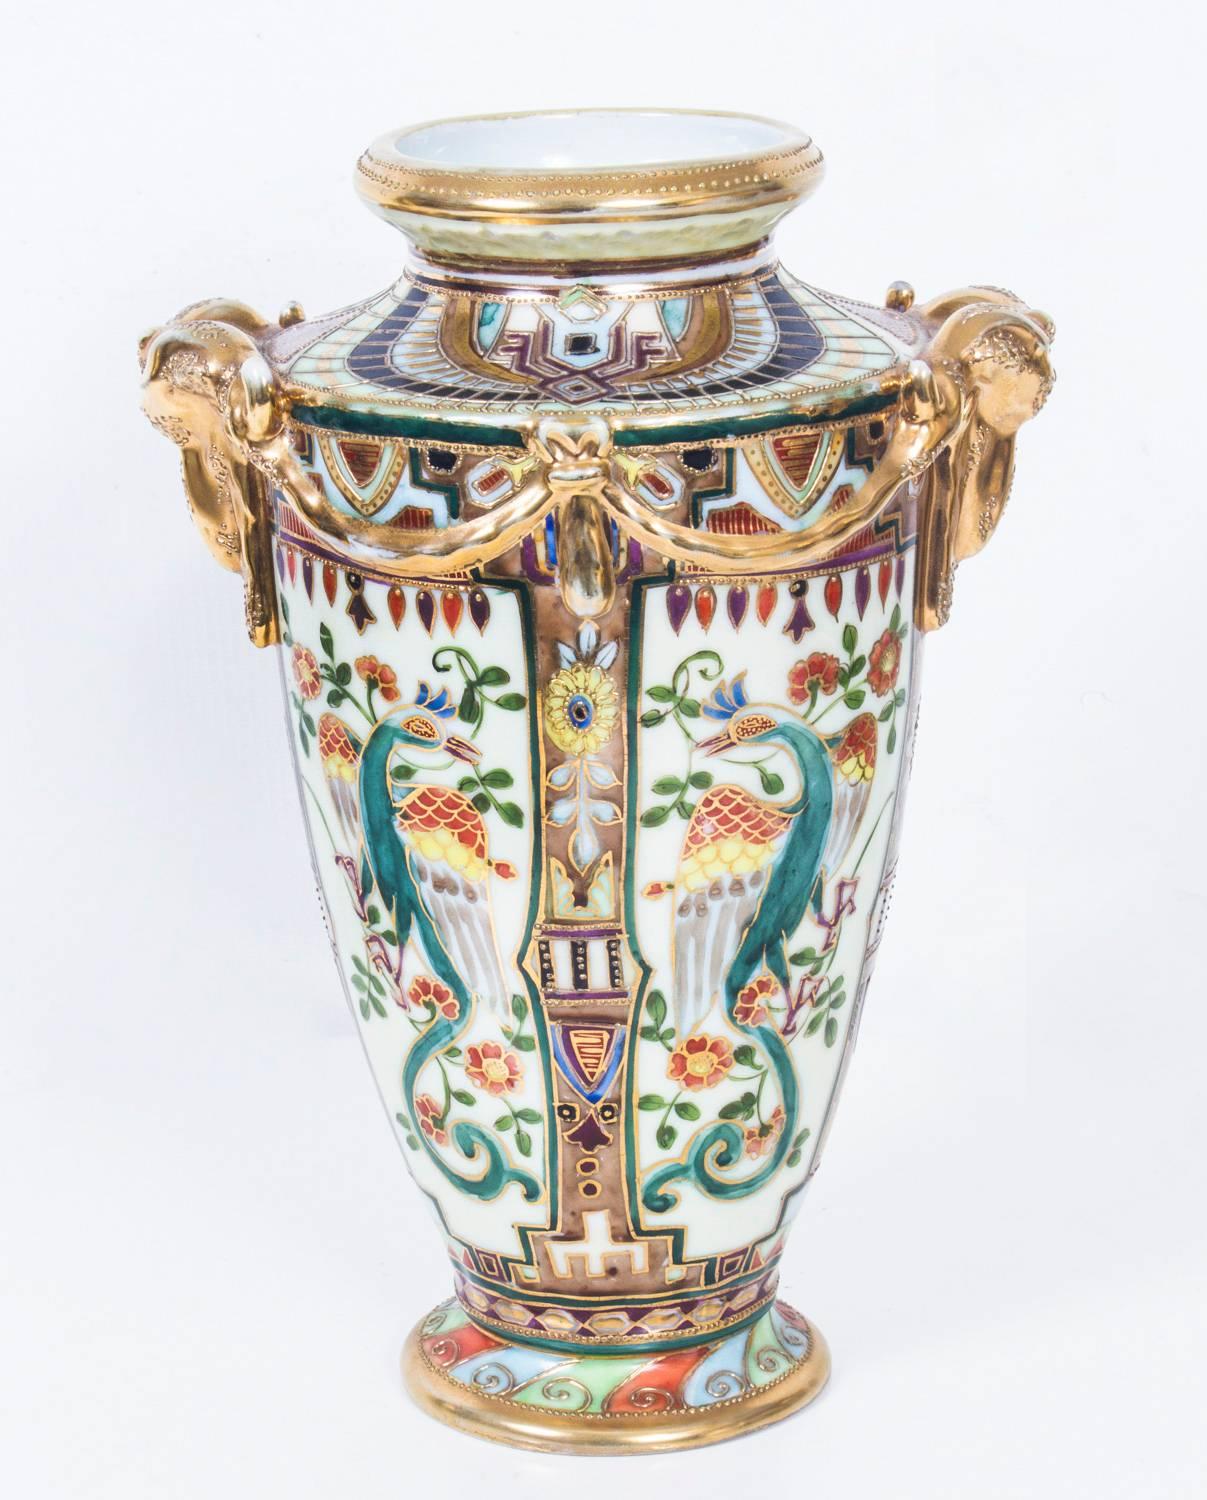 This is a beautiful pair of vintage hand-painted Noritake porcelain vases, circa 1920.

They feature attractive multicolored decoration with floral patterns, foliage, birds and wonderful gilded highlights. 

In still a certain elegance to a